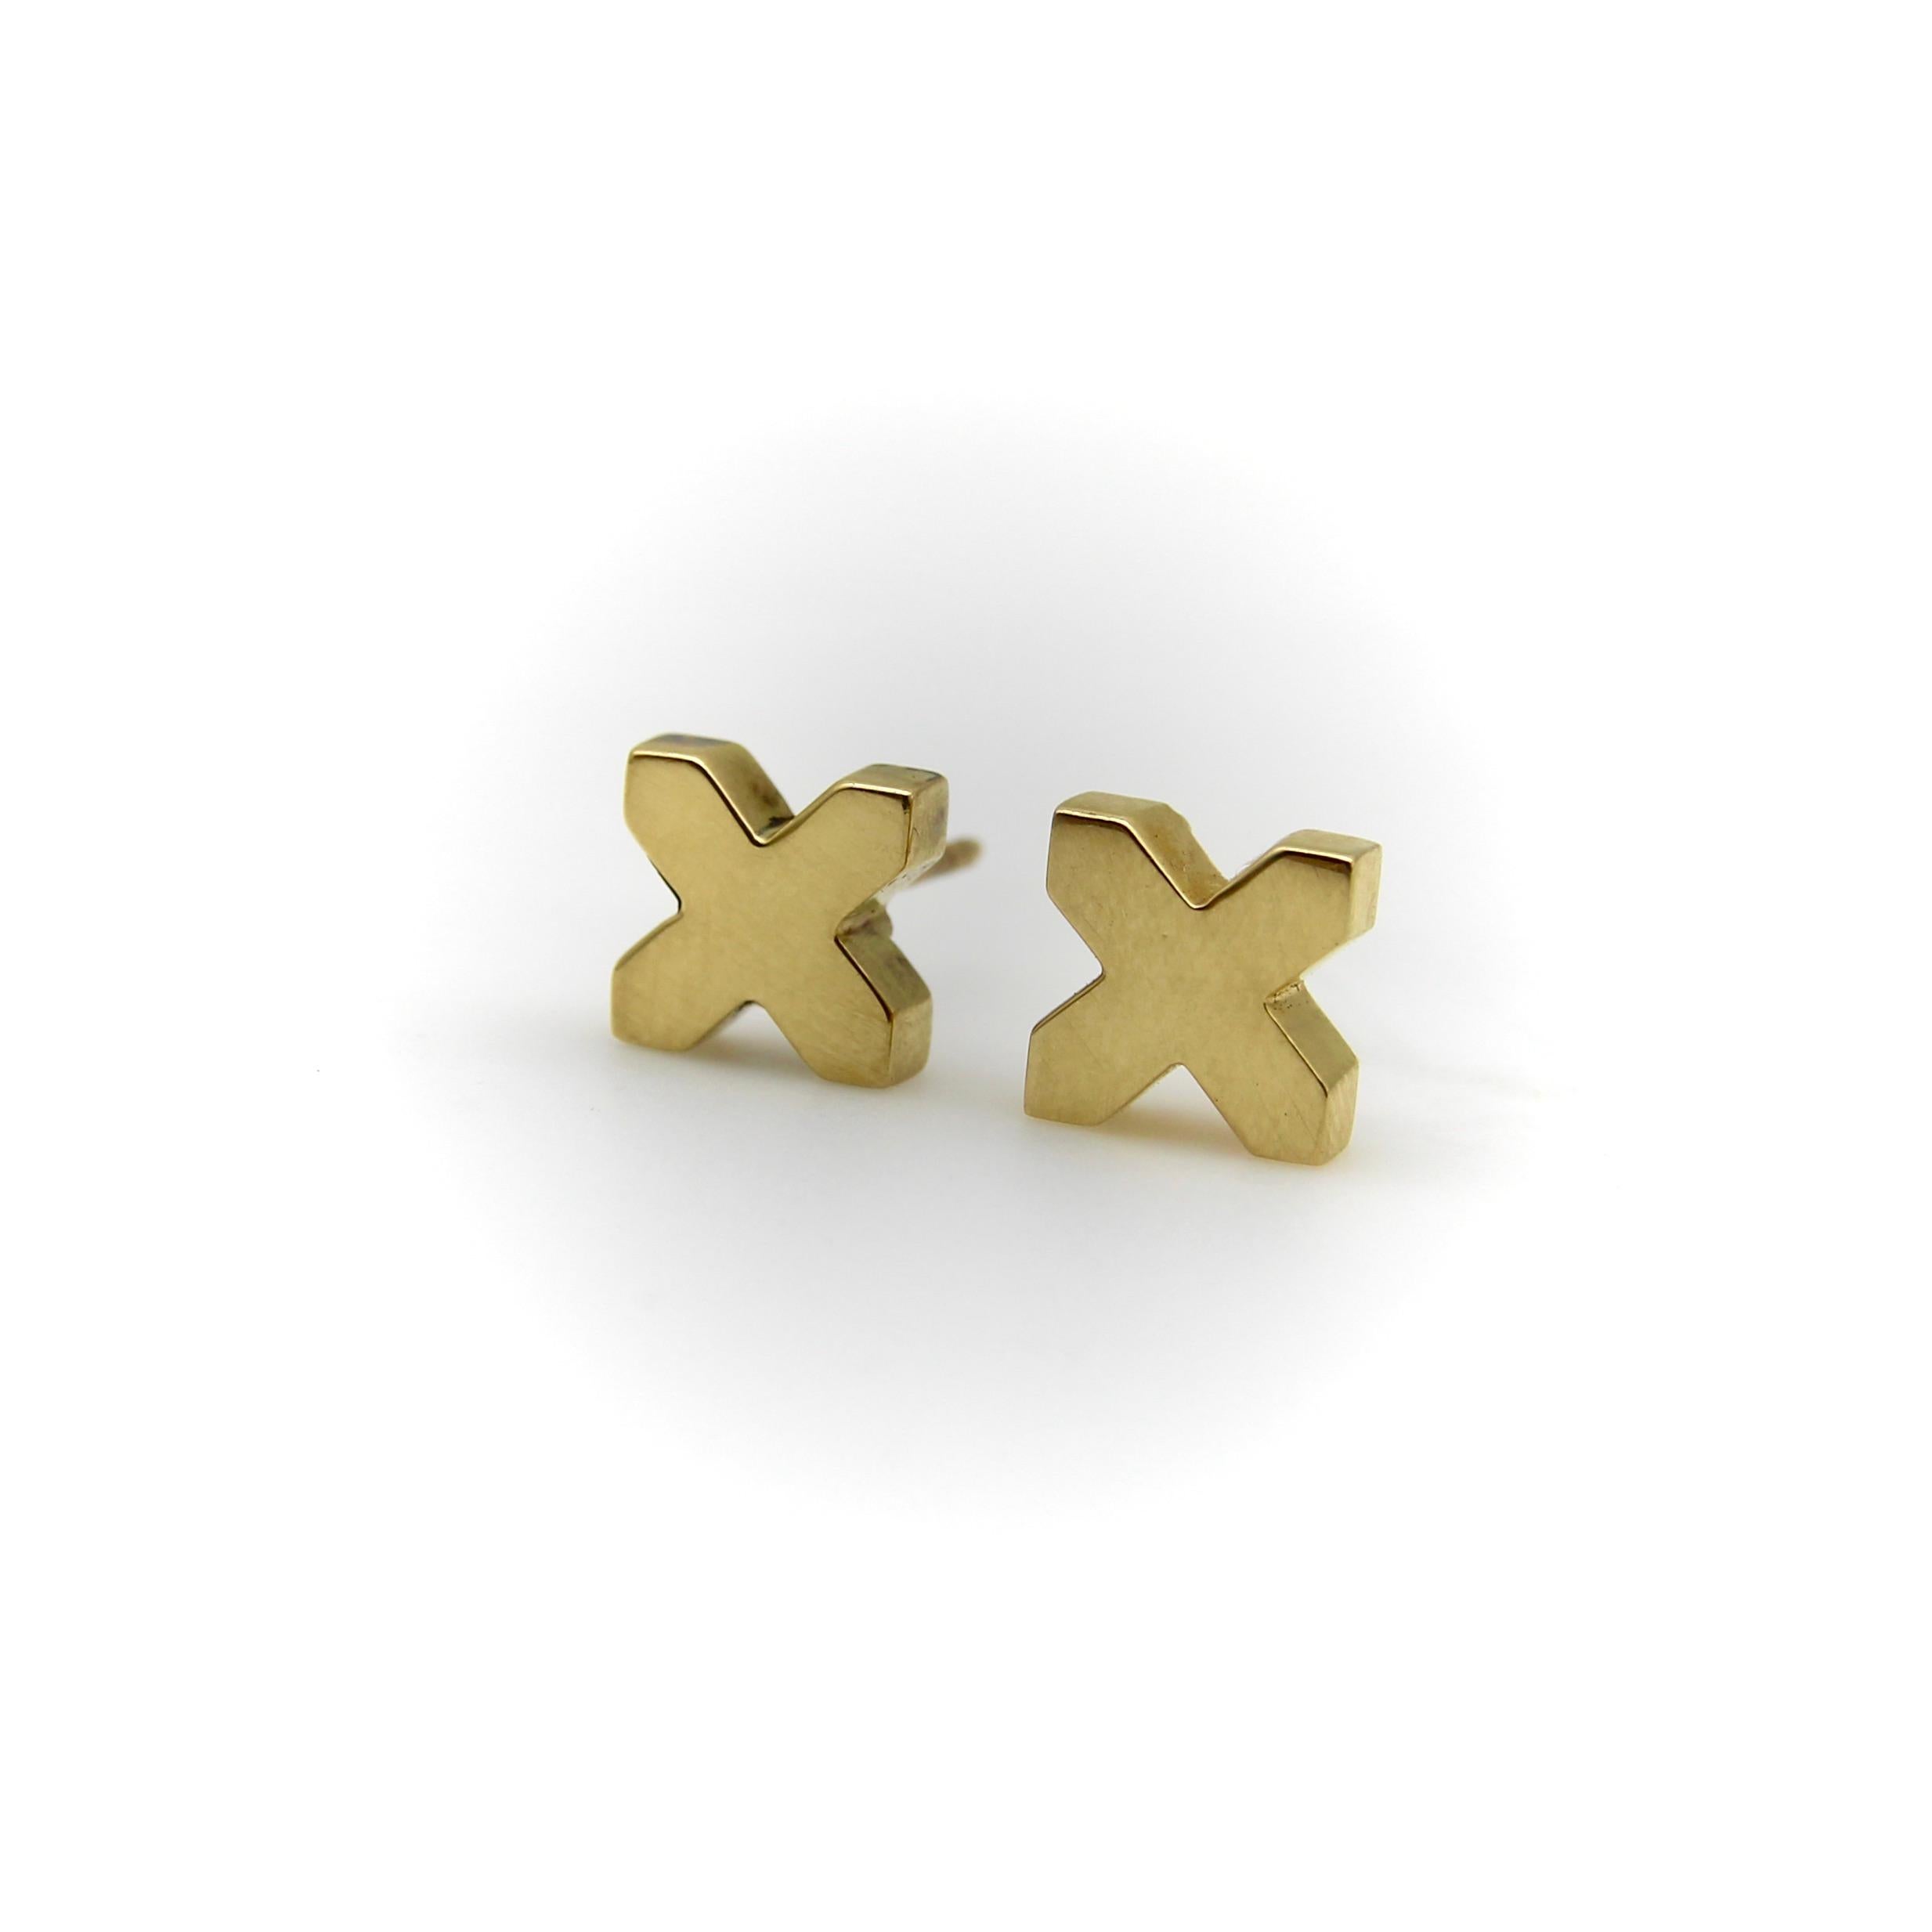 Tiffany & Co. has used the X as one of their signature design elements for decades. This pair is another version of the many stylized X’s in the Tiffany lexicon. We like them because of their blocky three-dimensionality and references to pop